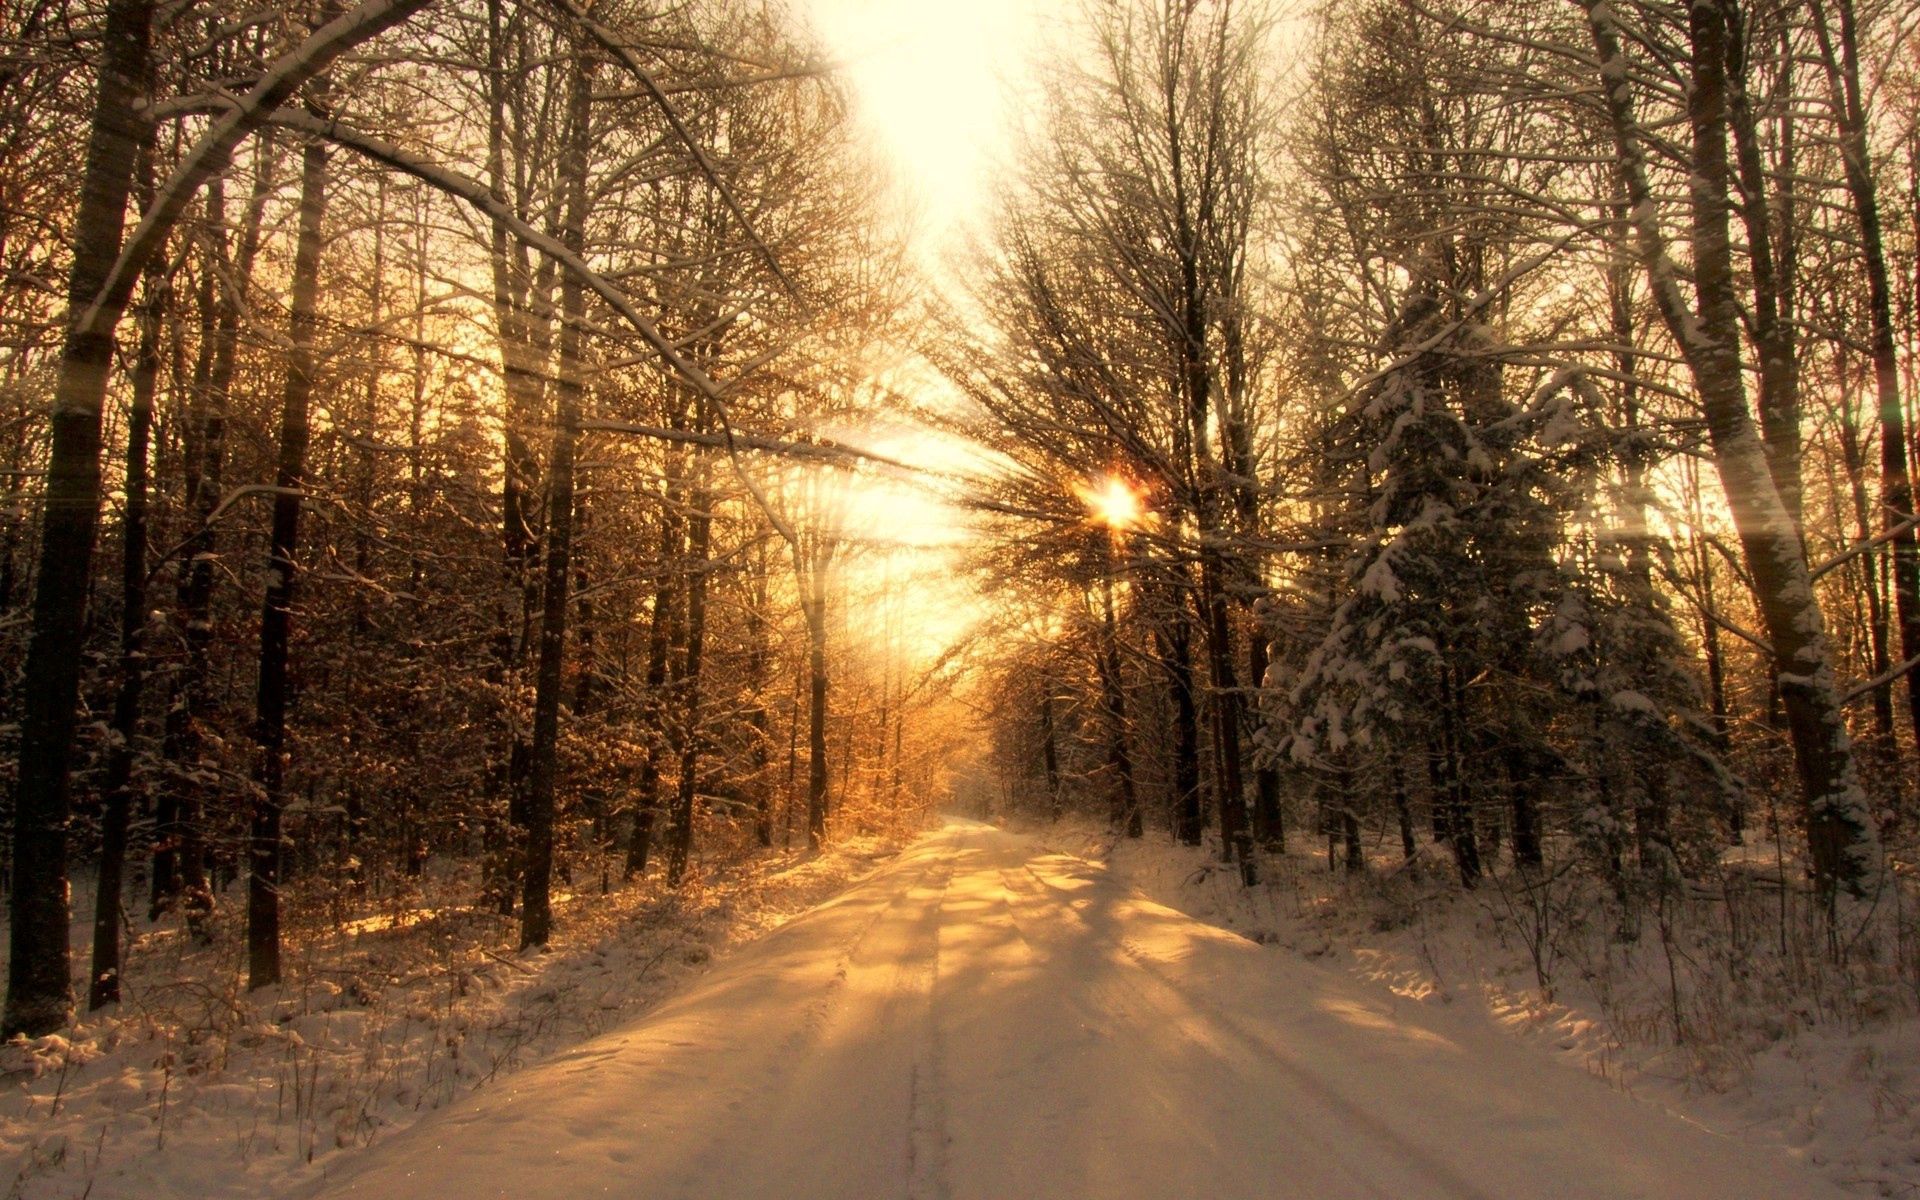 snow, winter, nature, trees, beams, rays, road, forest, shadows, sunlight